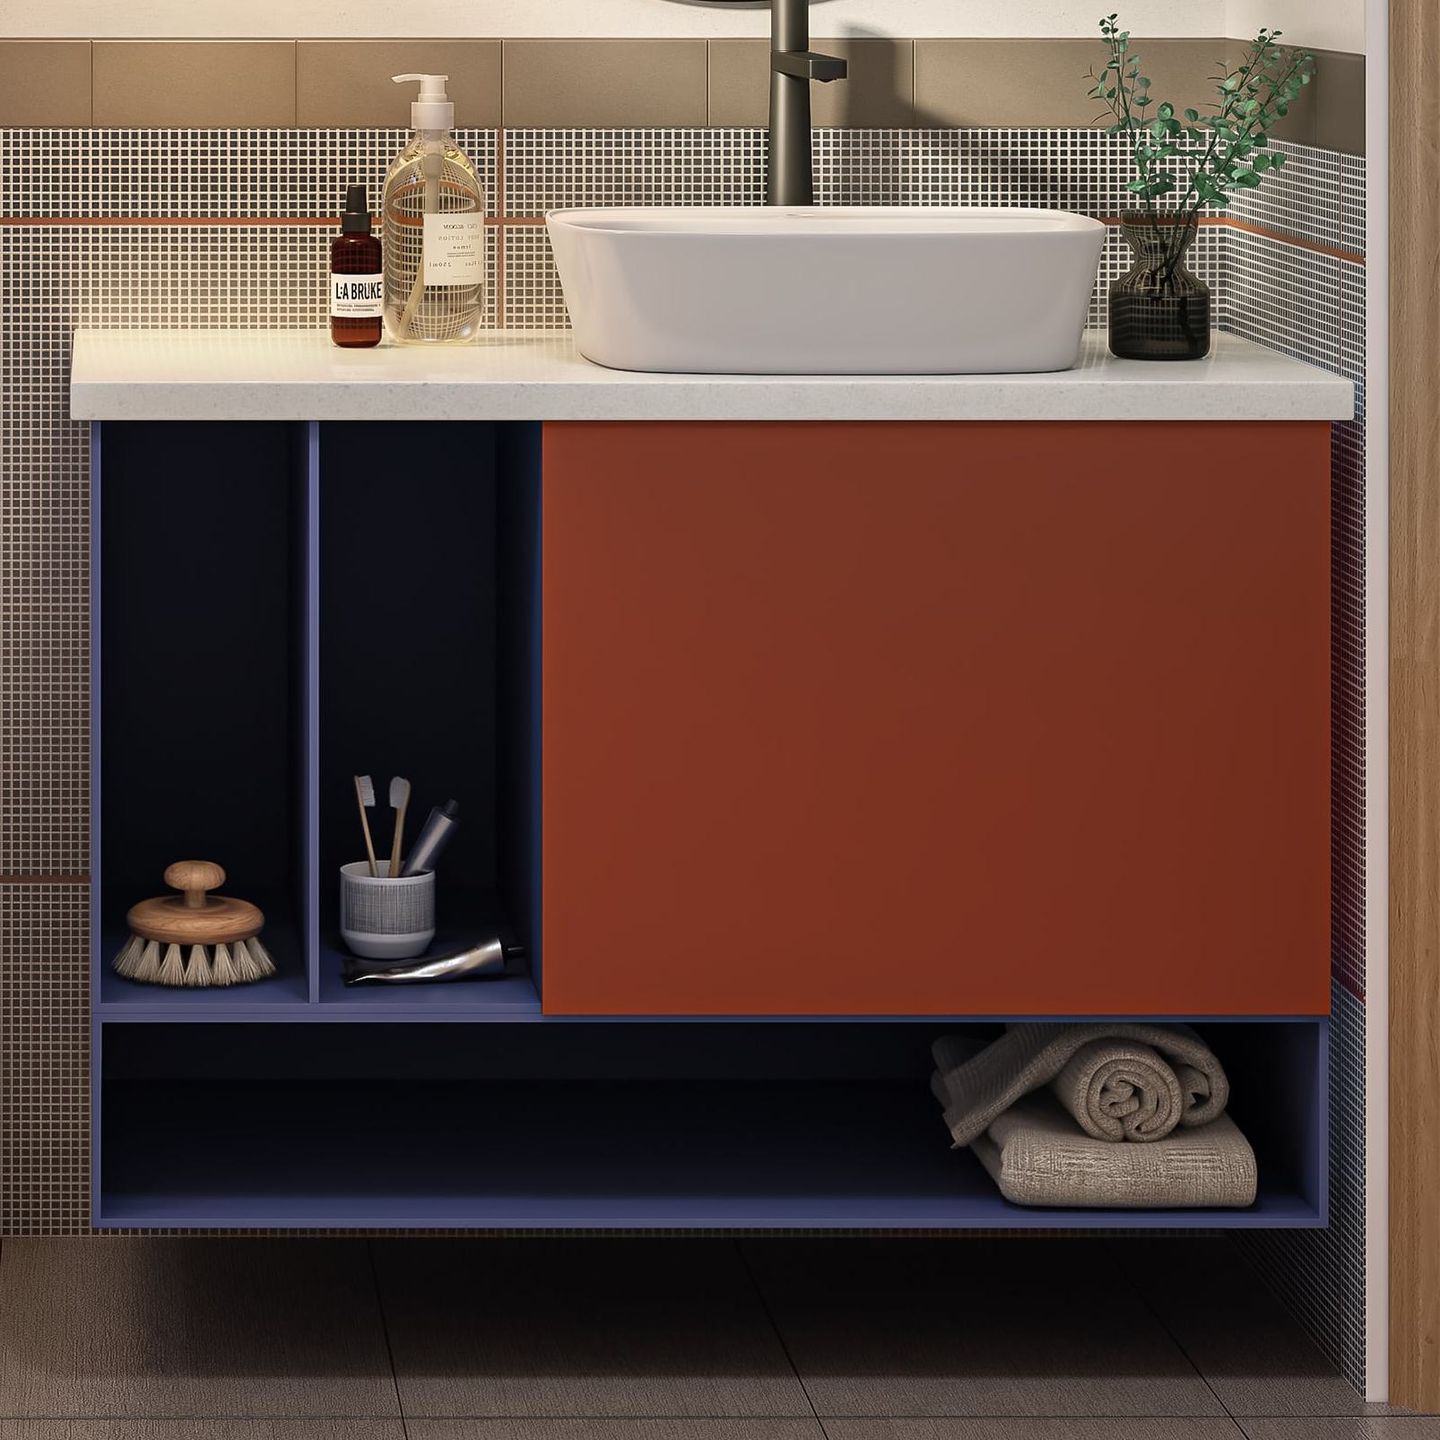 Durable Red And Blue Laminates Design For Vanity Units - Livspace